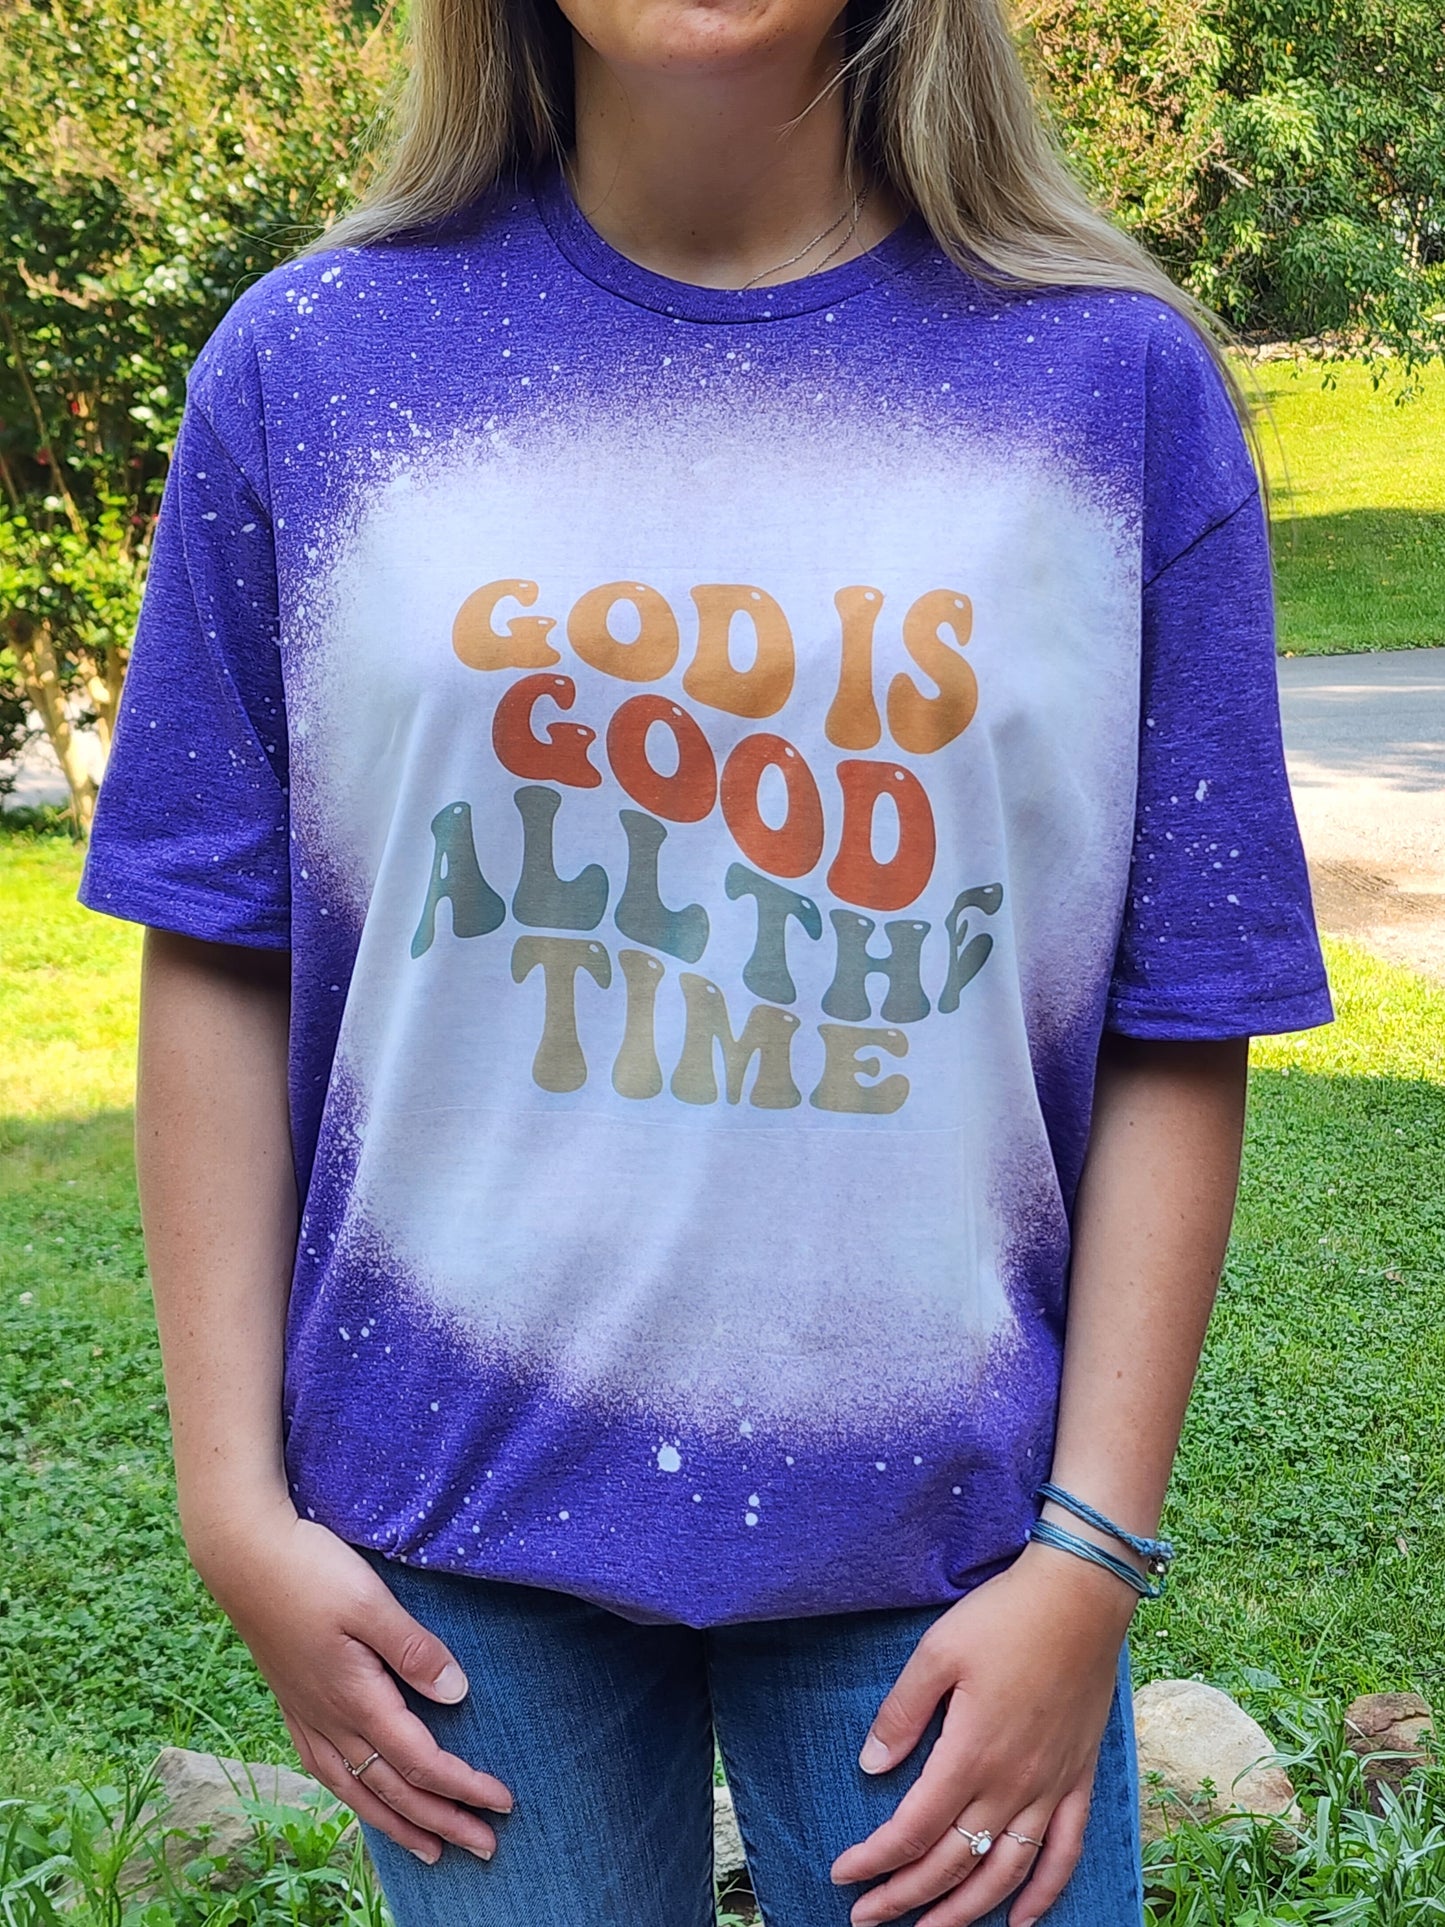 God is good all the time sublimation shirt